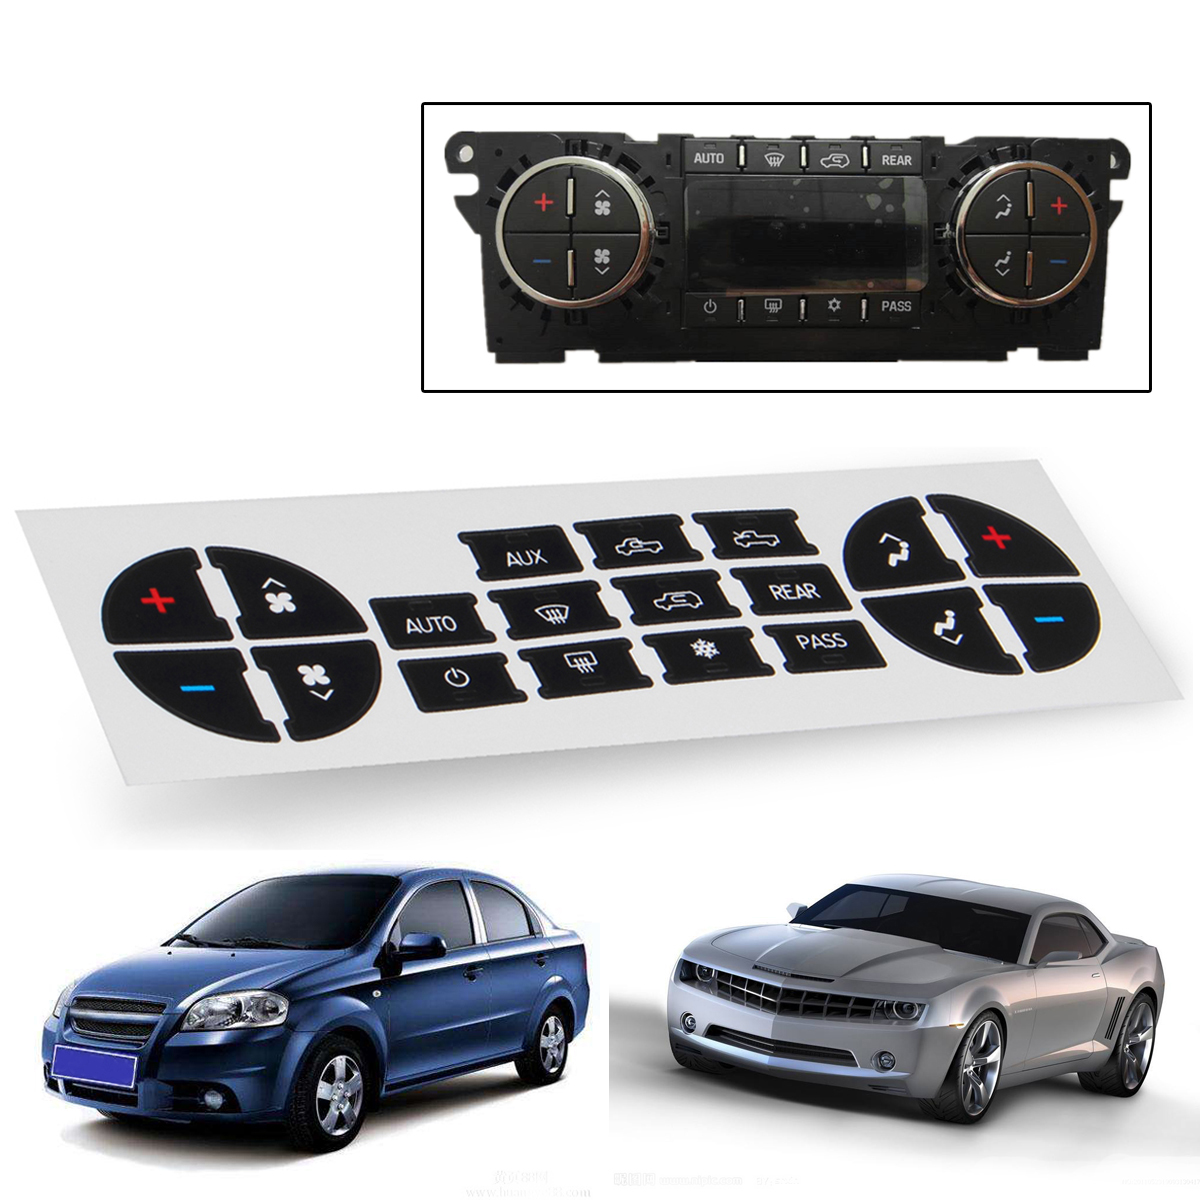 AC Button Repair Kit Dash Replacement 07-13 GM Vehicles Car Decal Stickers US SELLER - Auto GoShop